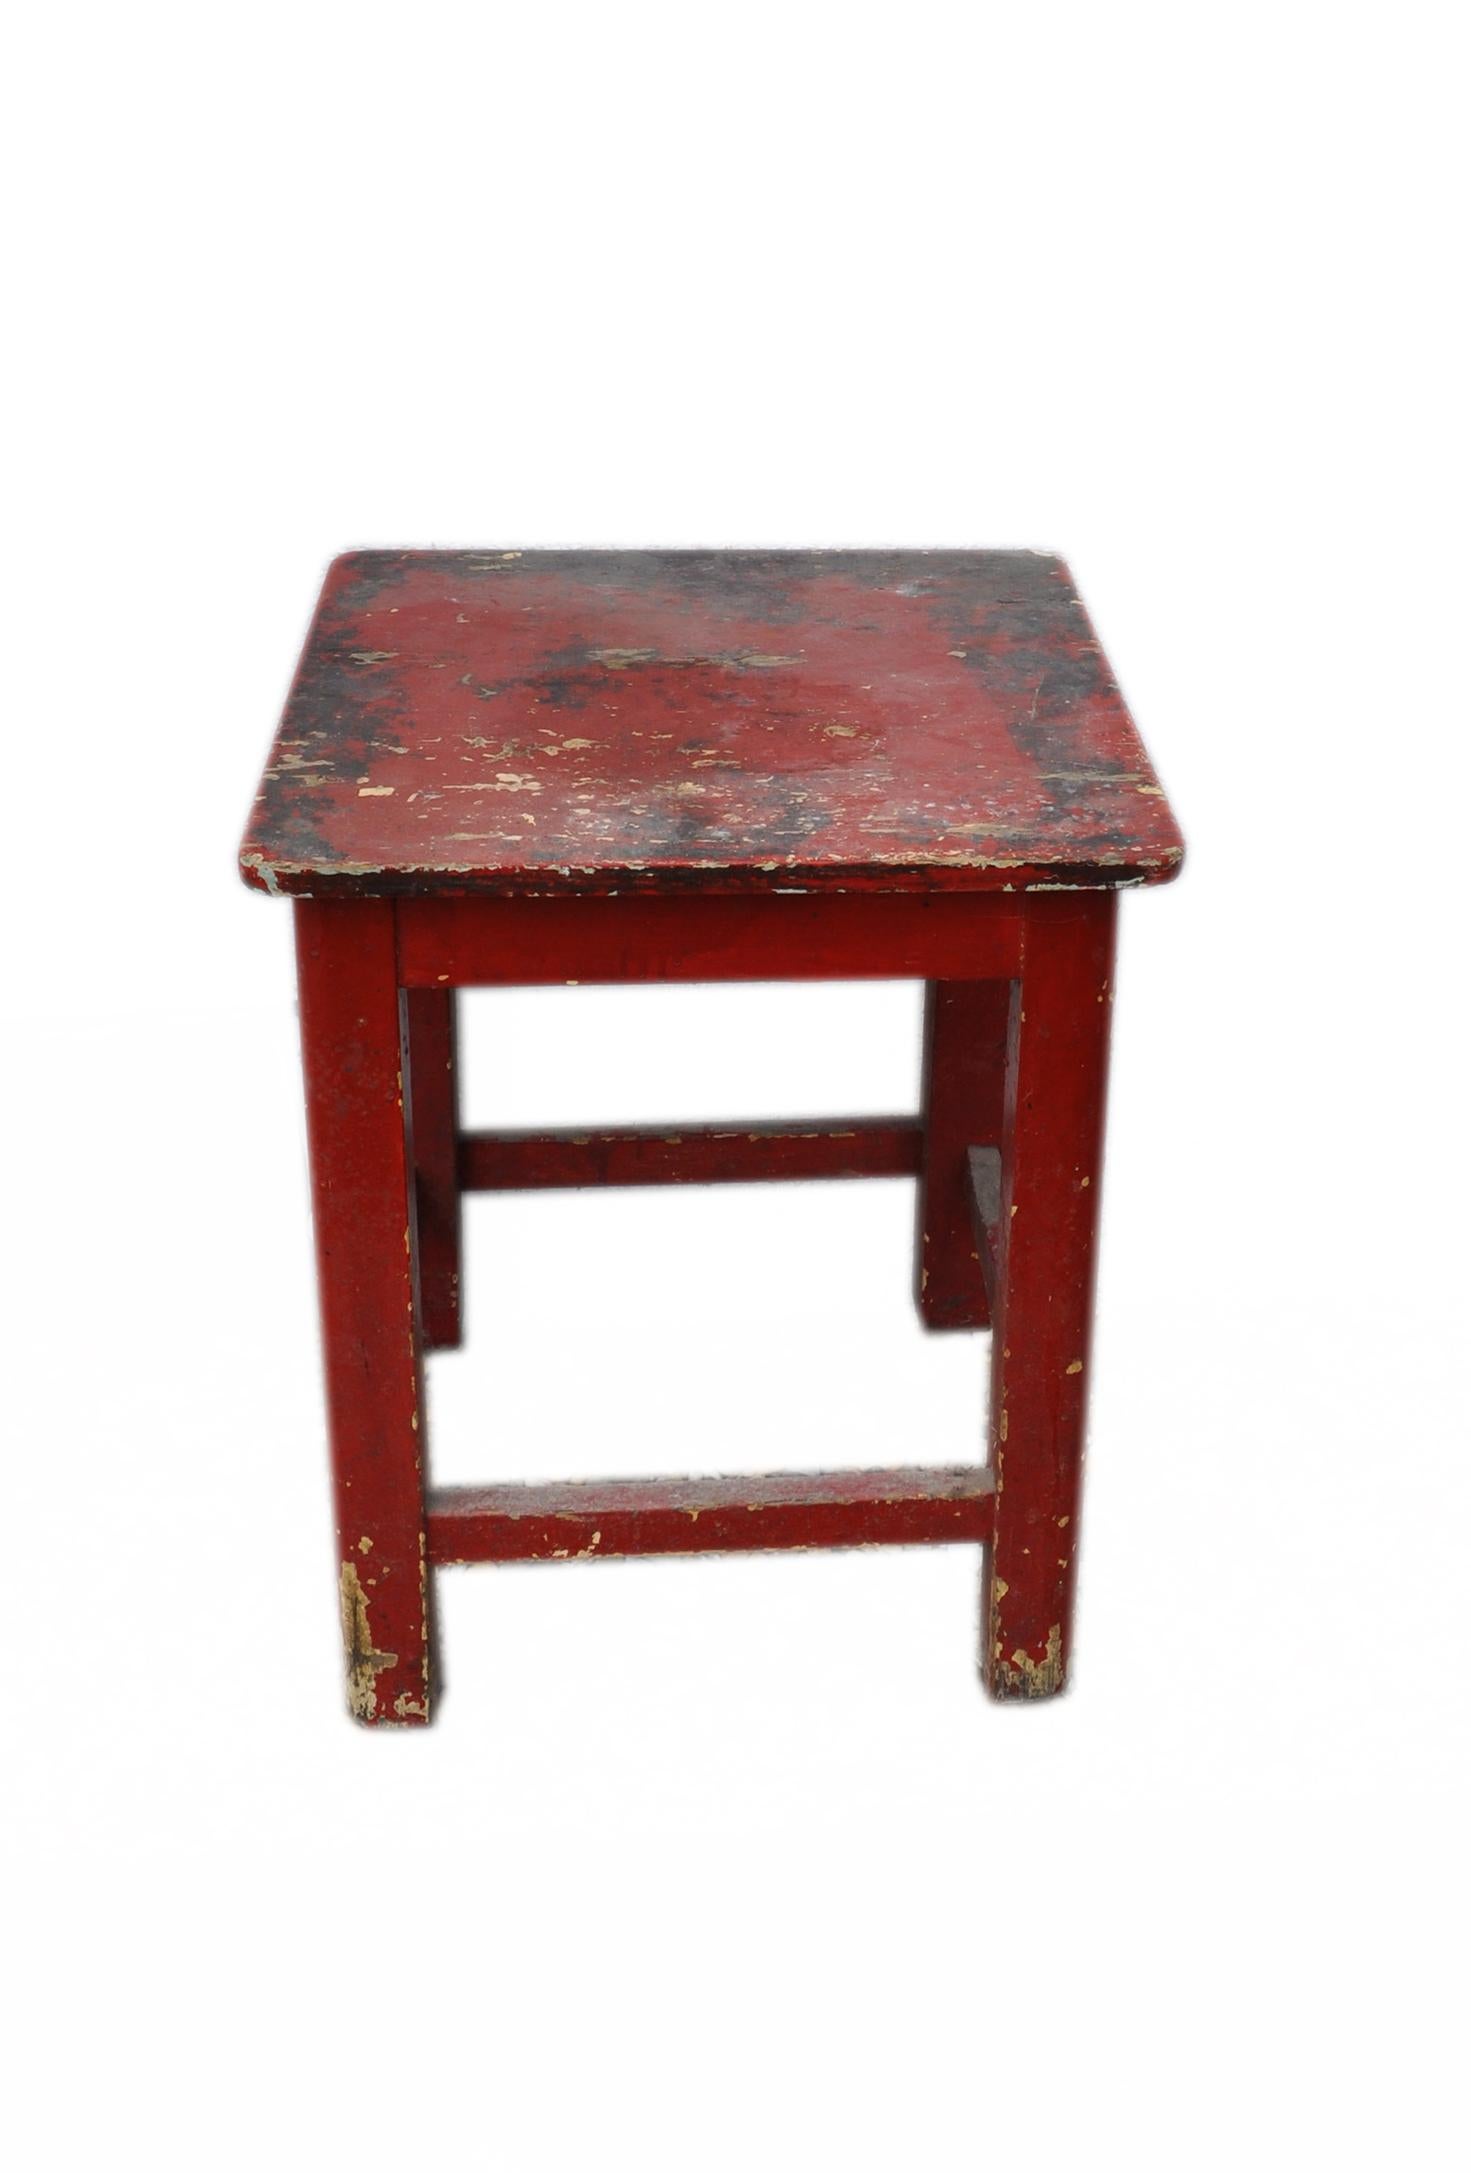 Rustic Painted Red Pine Kitchen Stool, circa 1920s